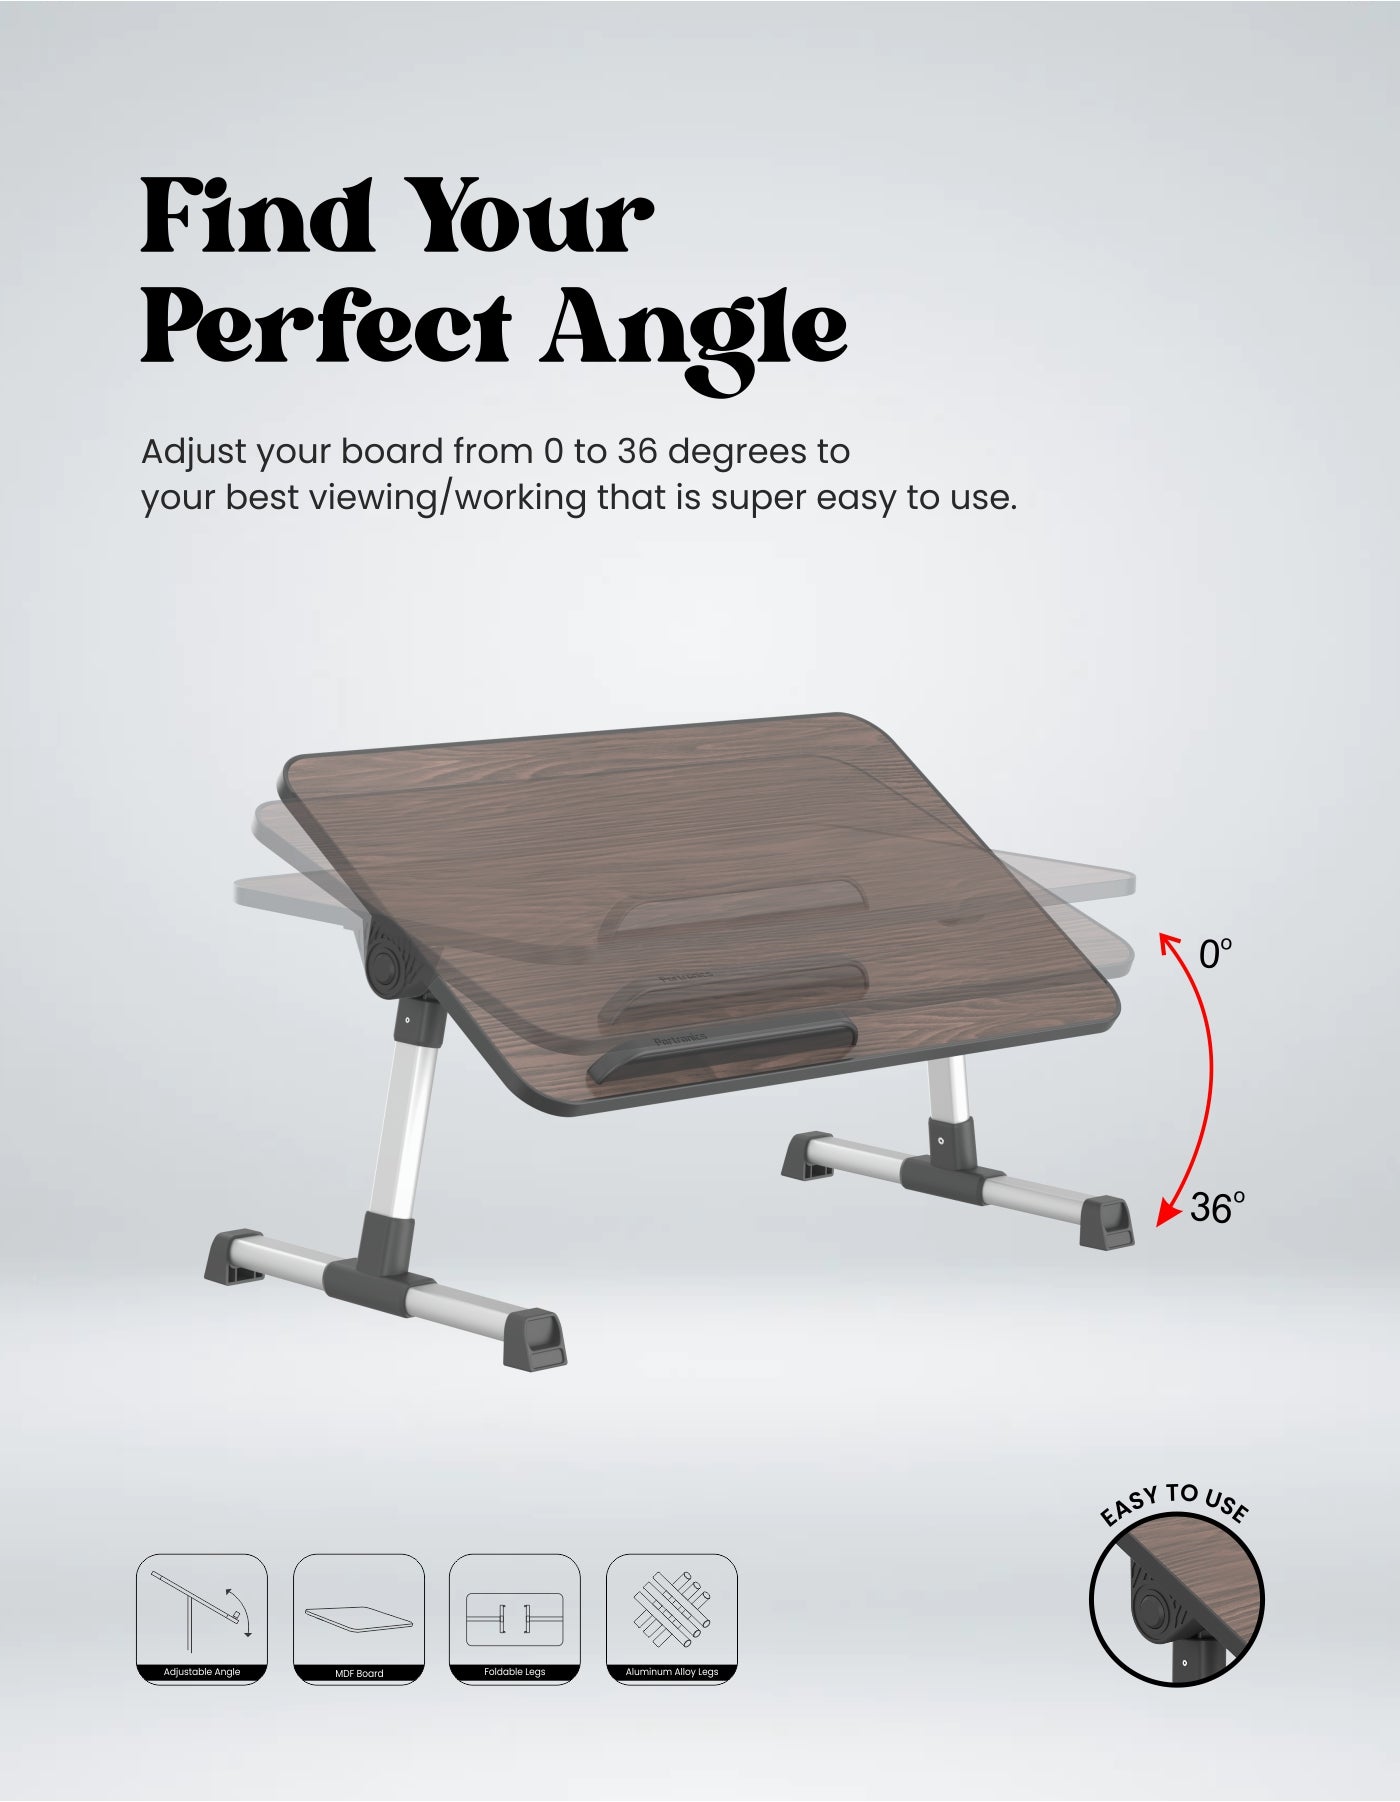 Portronics My Buddy adjustable and portable Laptop Stand for bed find your perfect angle